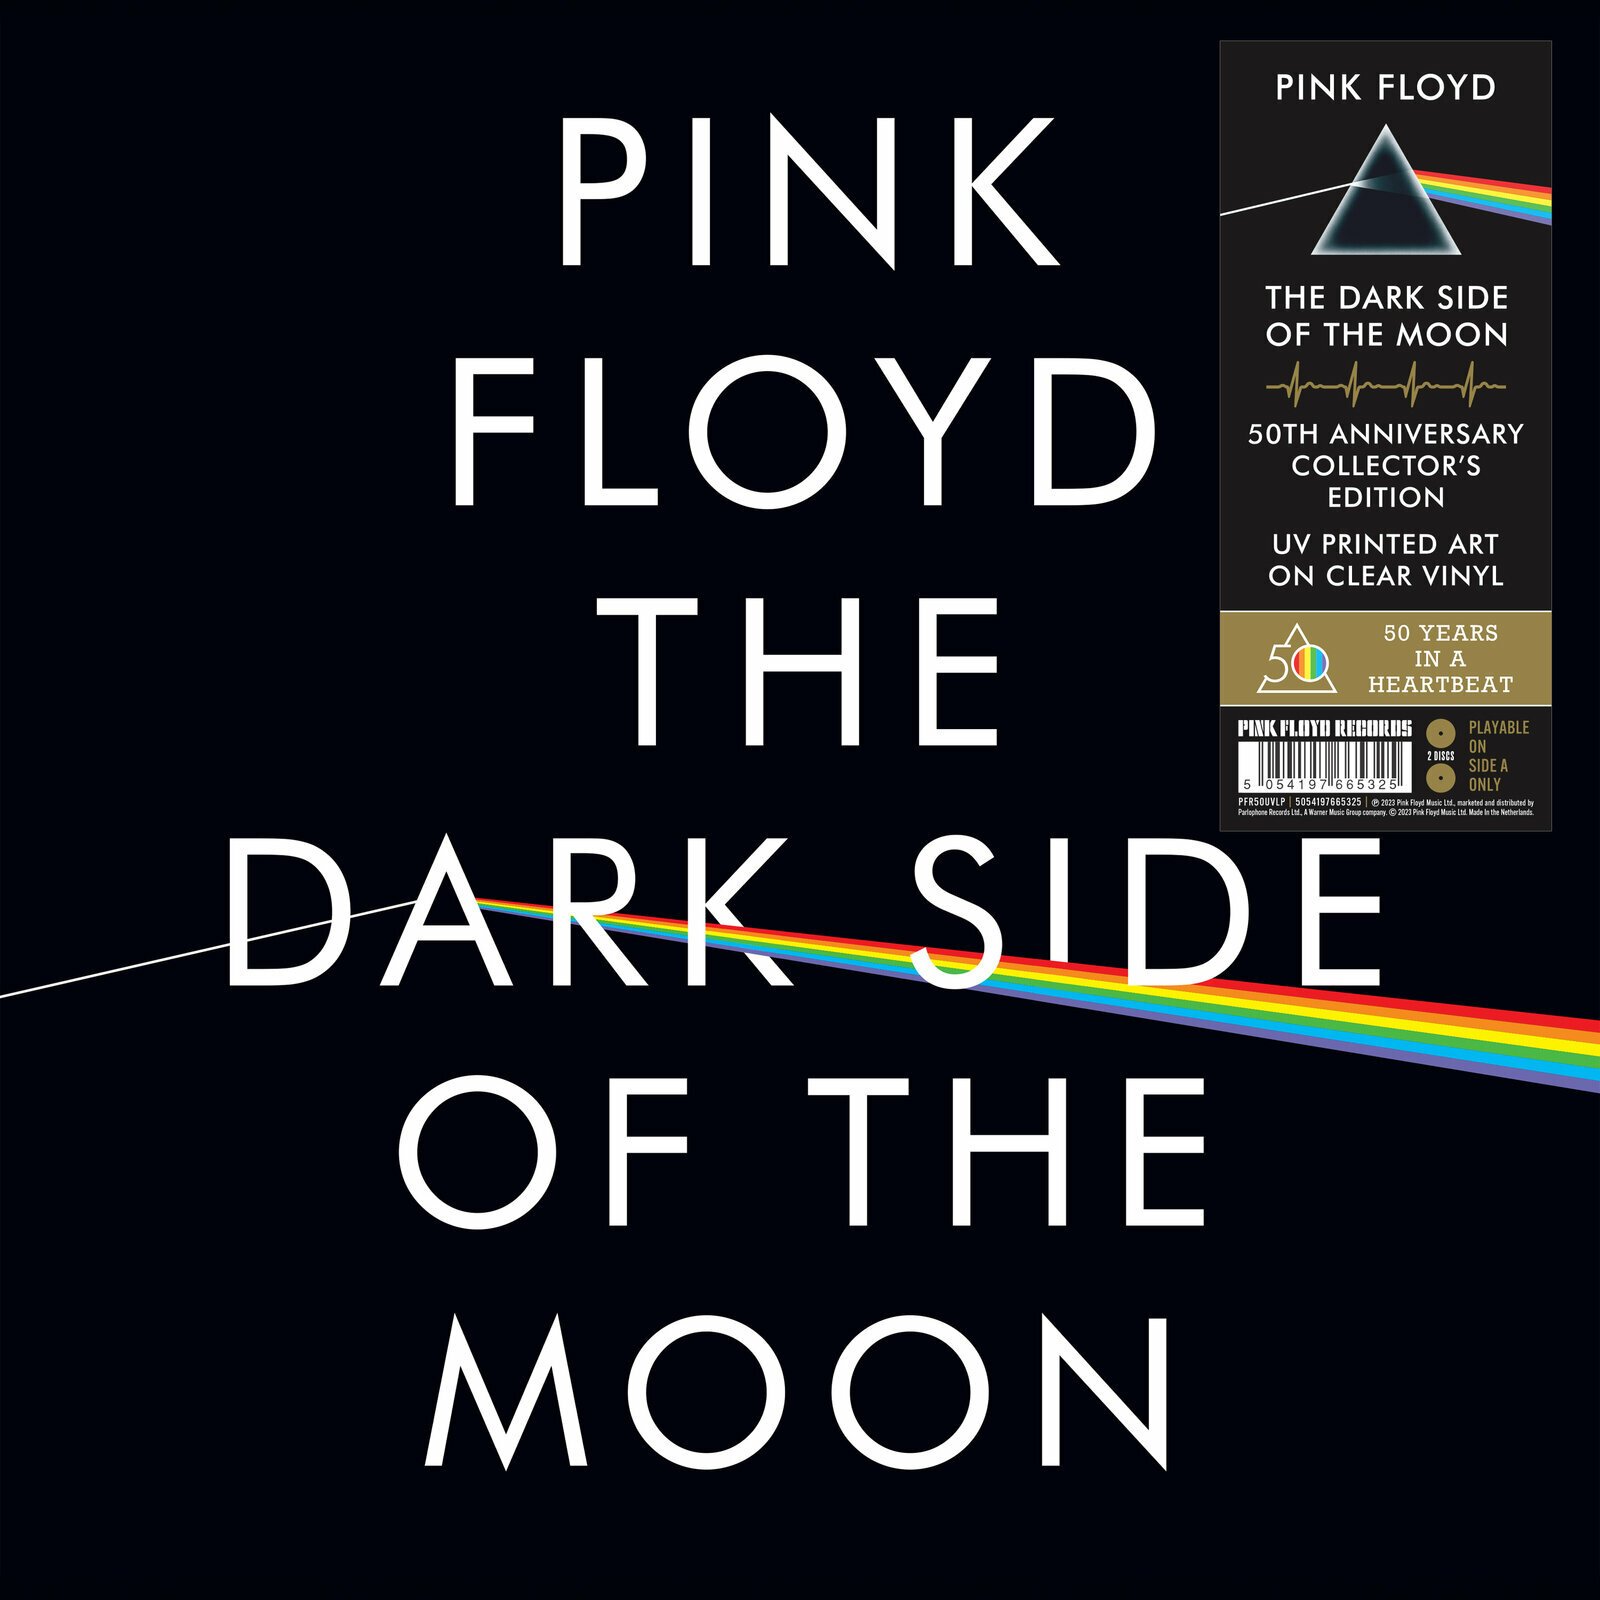 LP platňa Pink Floyd - The Dark Side Of The Moon (50th Anniversary Edition) (Limited Edition) (Picture Disc) (2 LP)